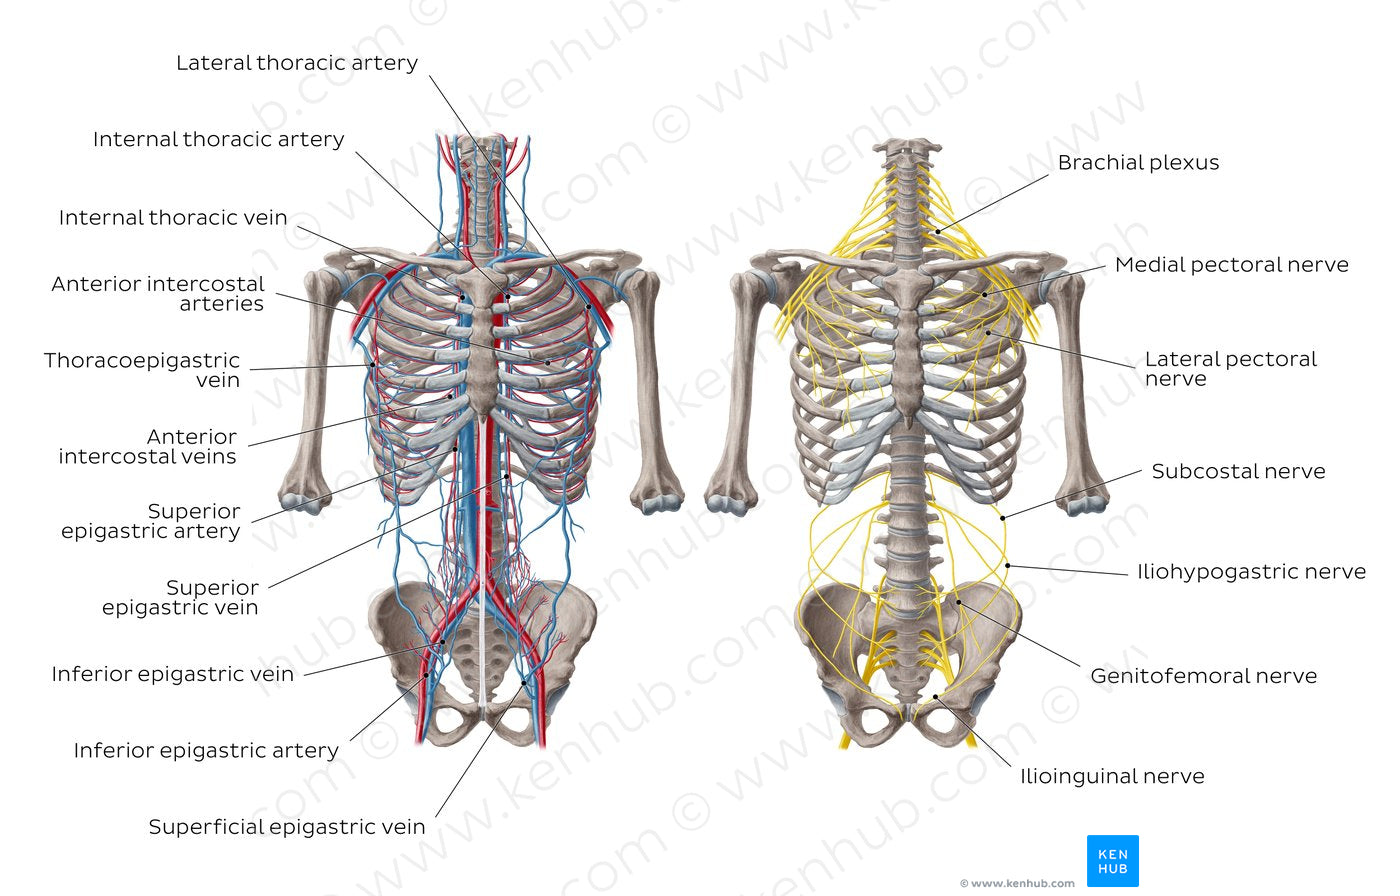 Nerves and vessels of the anterior thoracic wall (English)